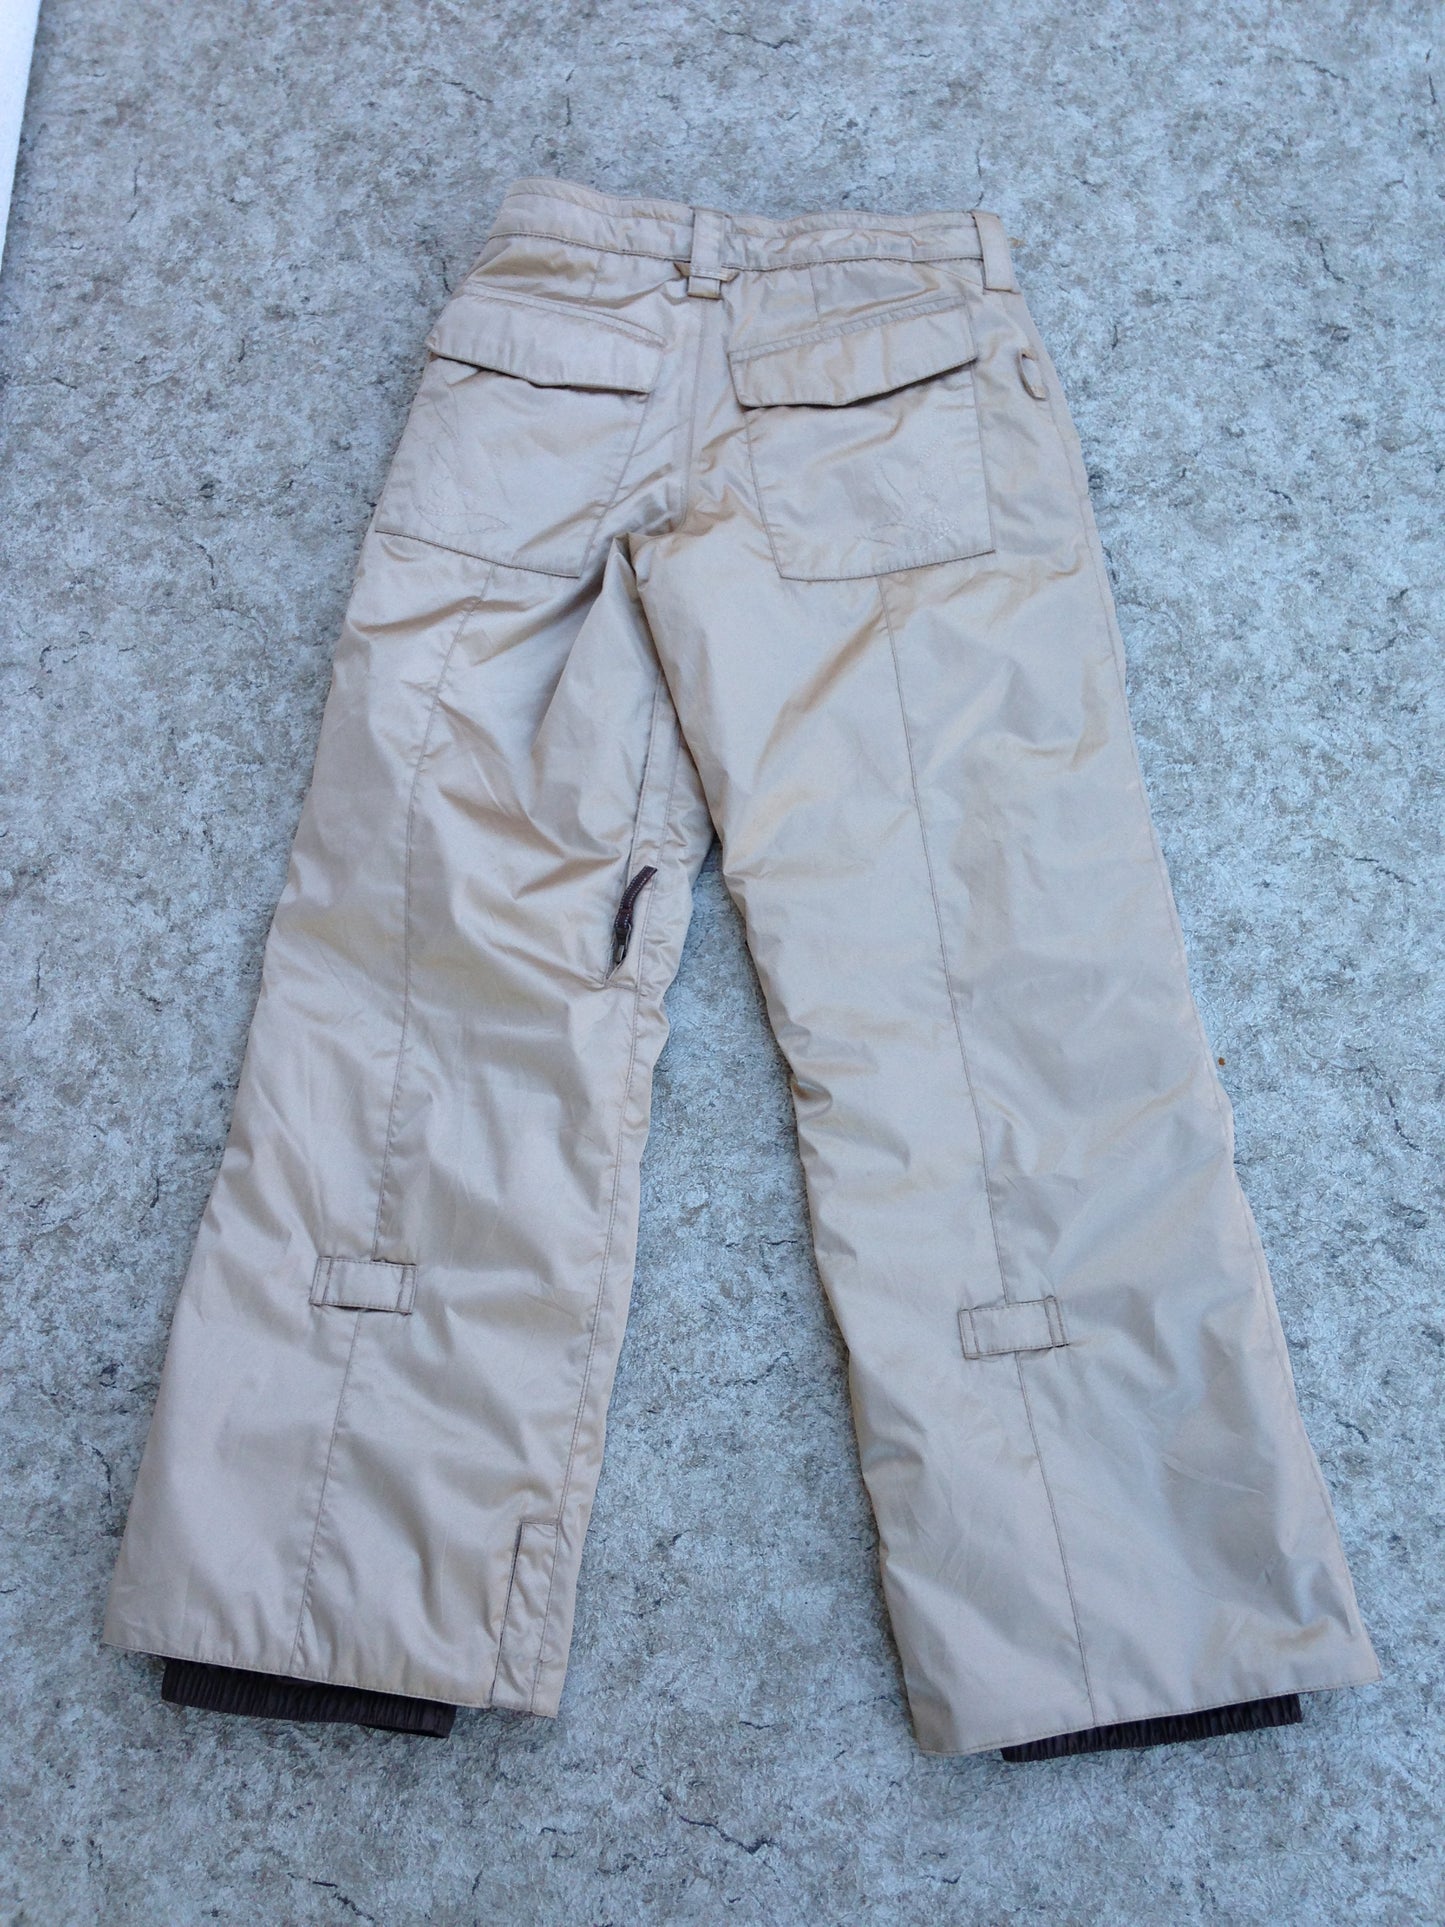 Snow Pants Child Size 14-16 Youth Burton Snowboarding Brilliant Gold and Pink New Demo Model Outstanding Quality